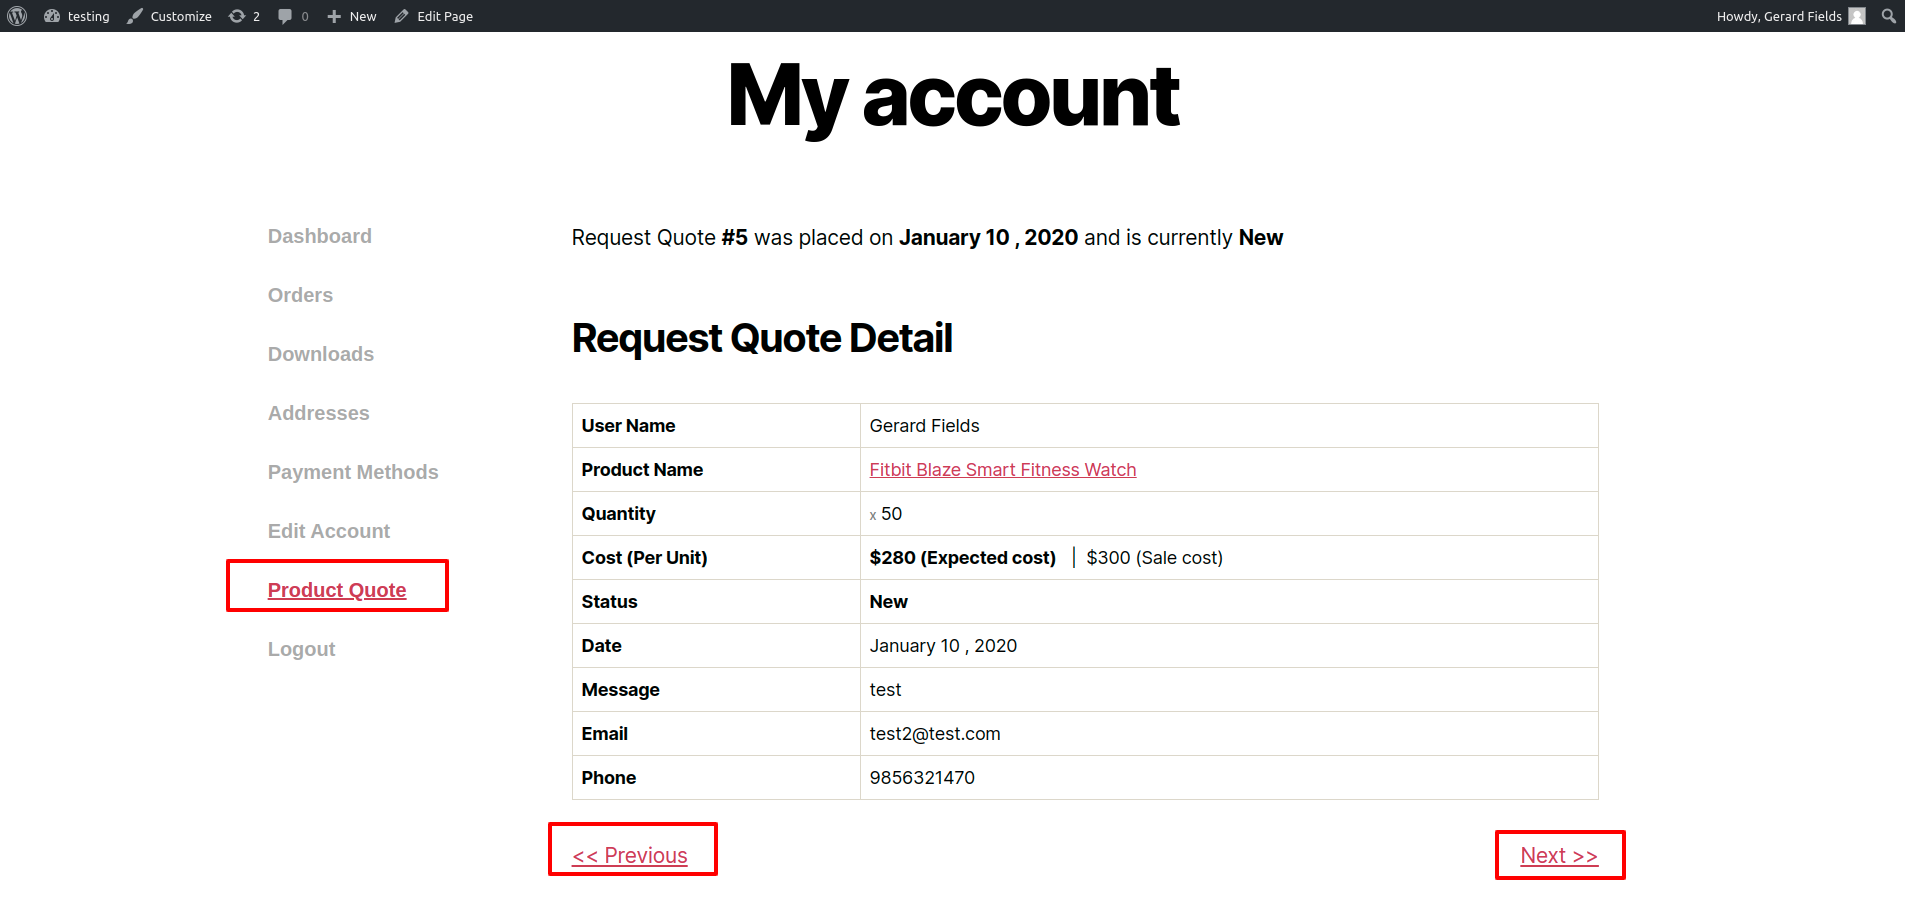 User get all the detail of request quote one by one in product quote view page in my account area.